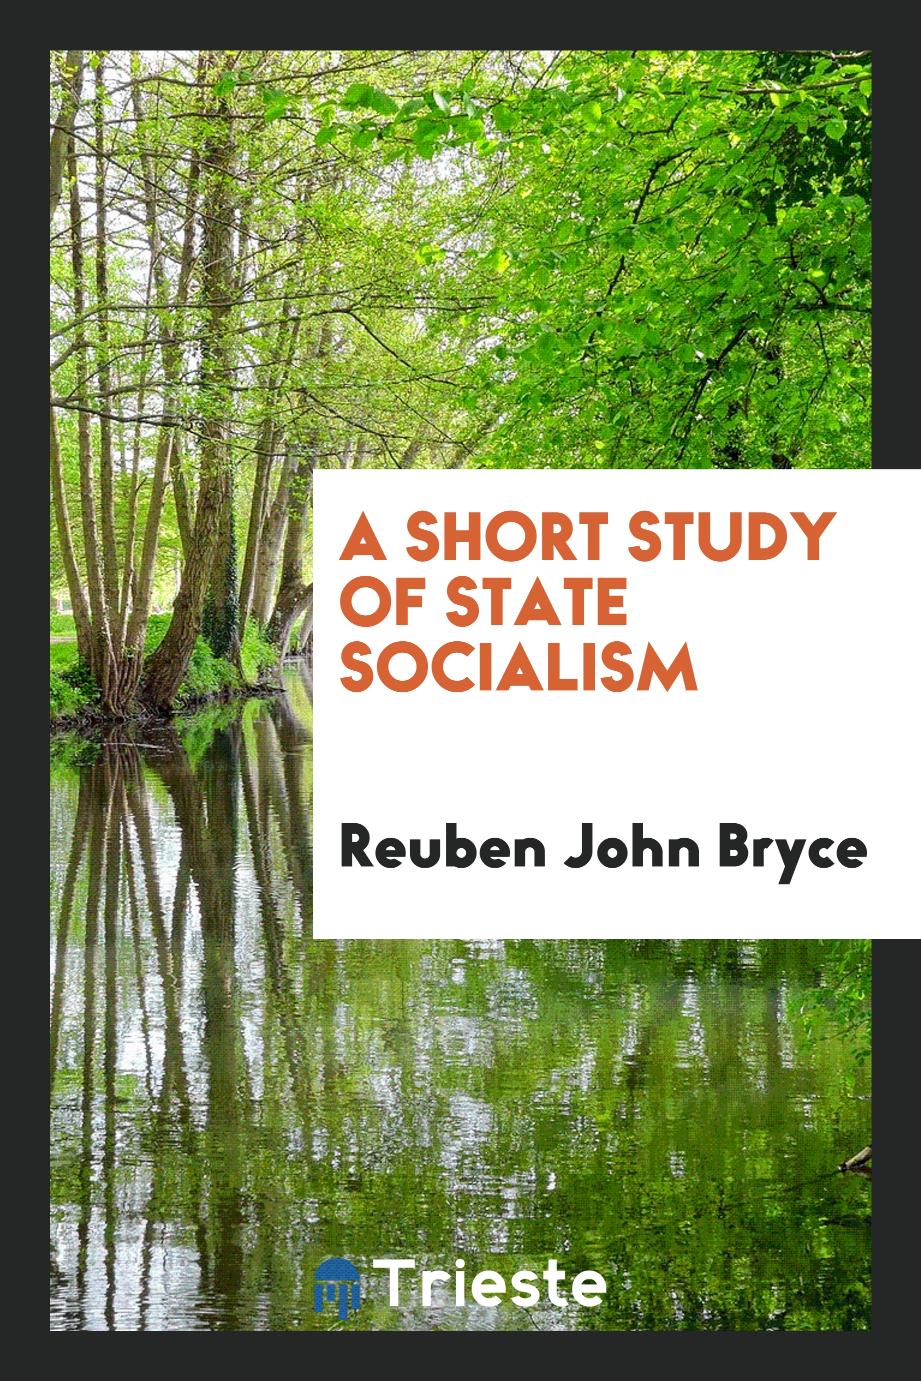 A Short Study of State Socialism